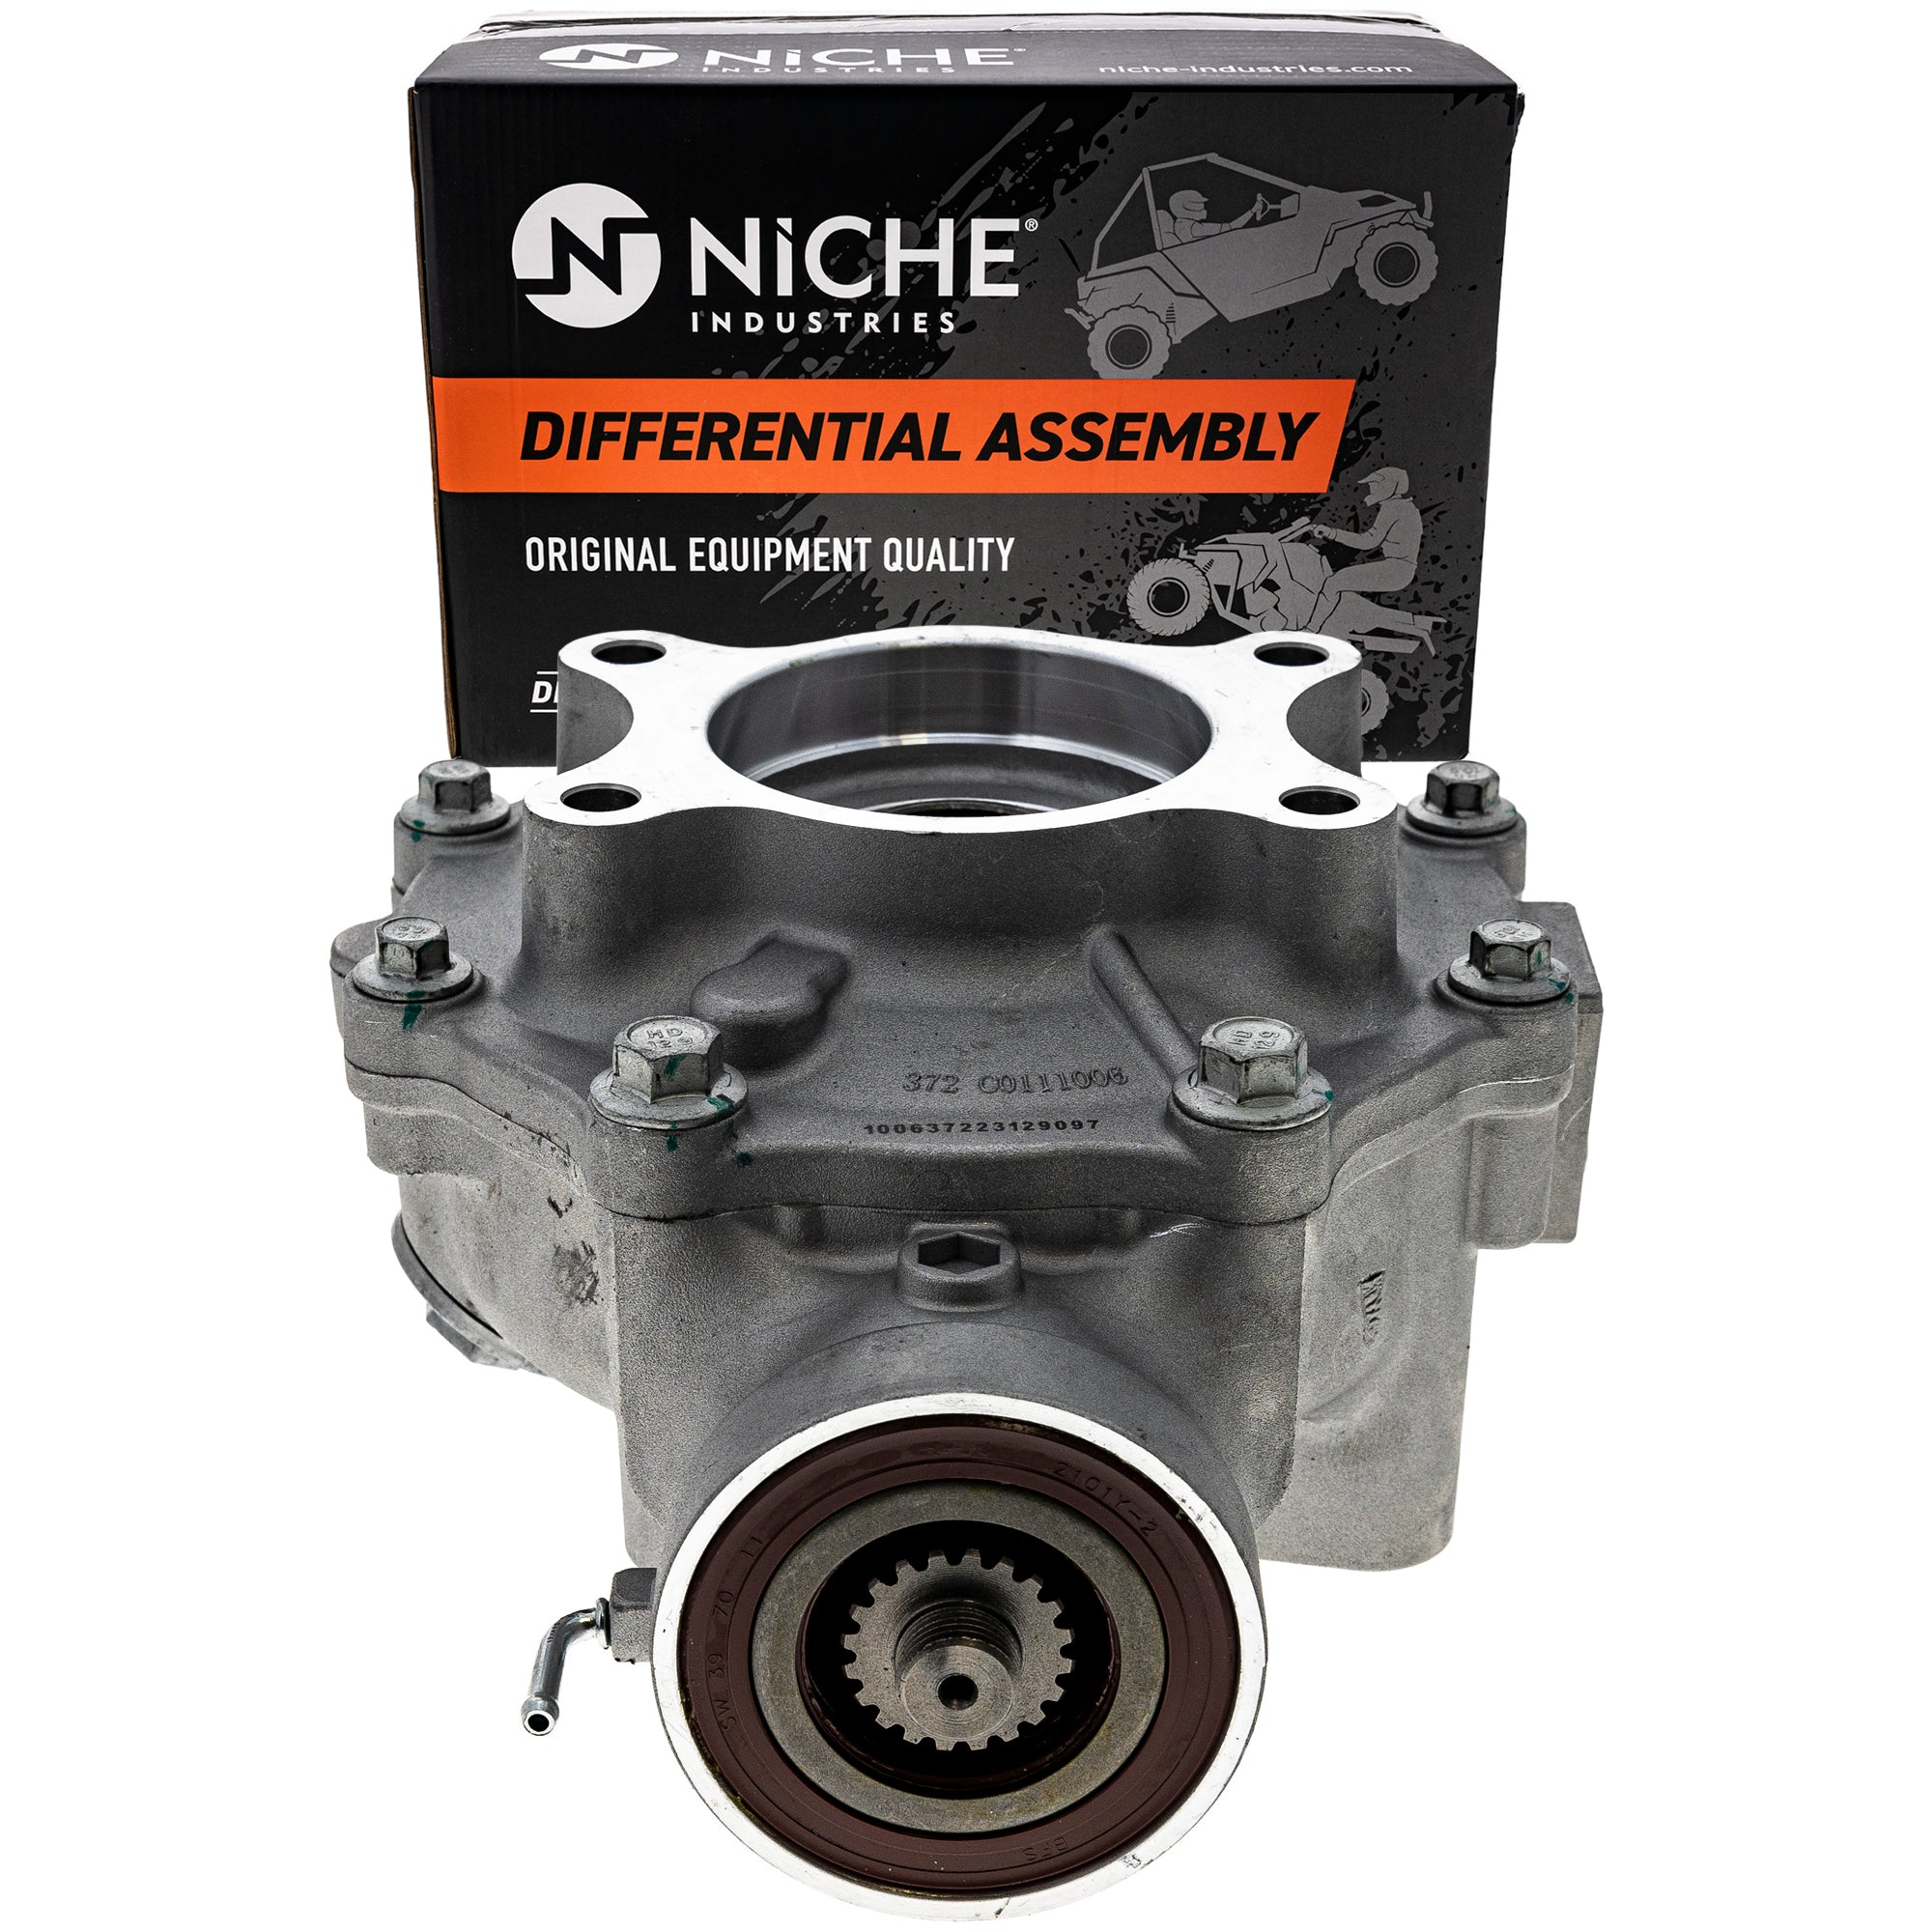 NICHE Rear Differential Assembly 41300-HR3-WB0